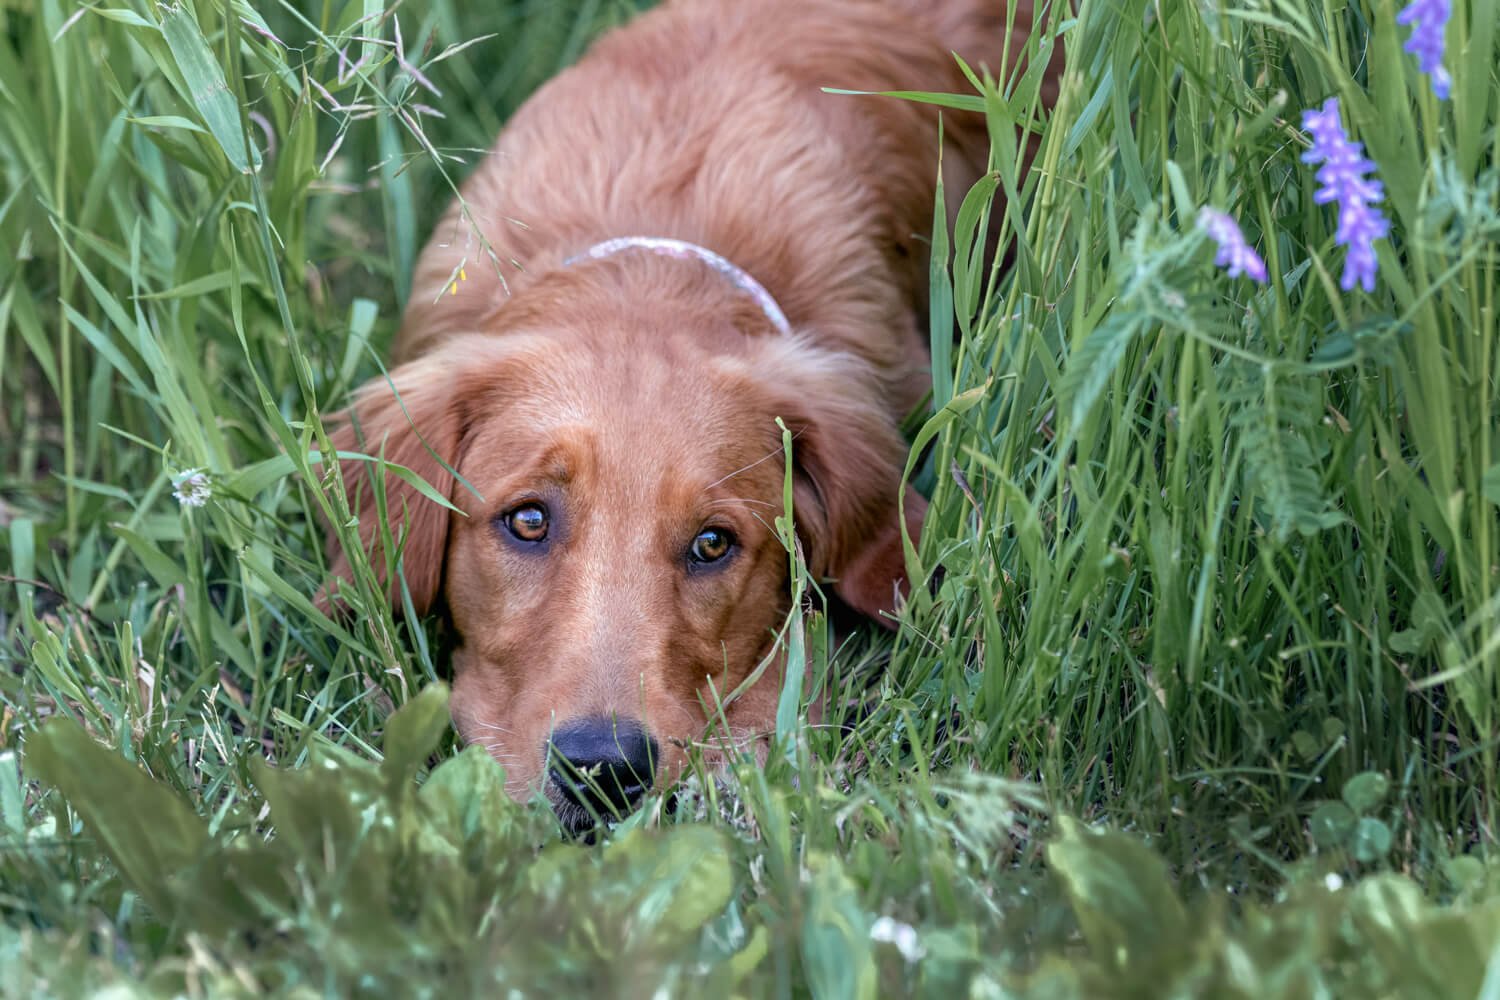 Lily cools off in the grass during her summer dog photography session at Evergreen Brickworks